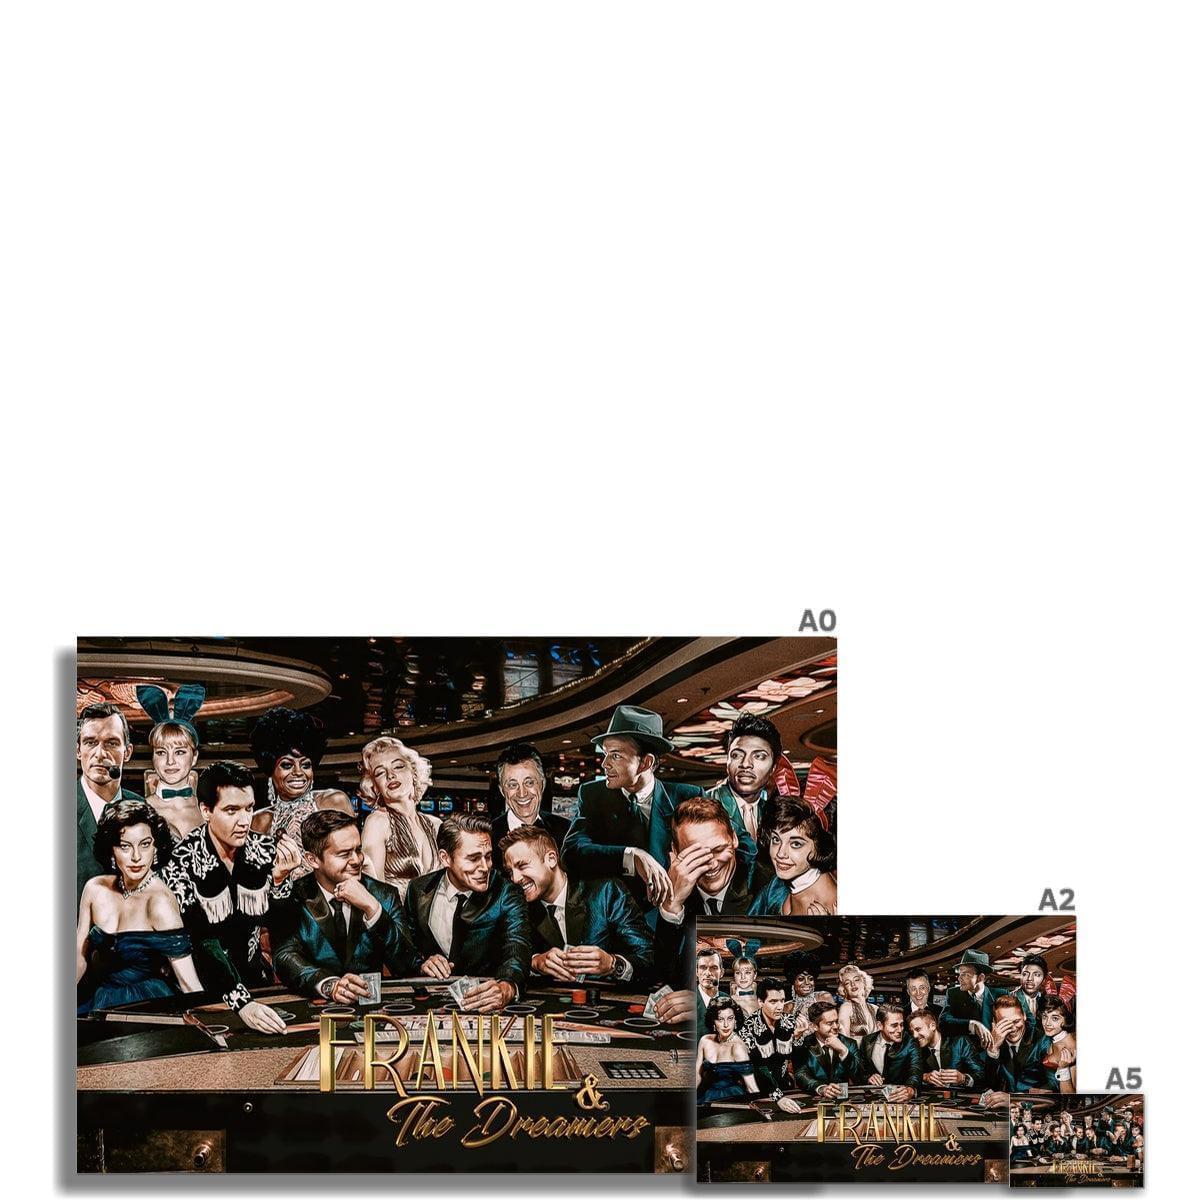 Frankie And The Dreamers Casino 2 Wall Art Poster | Art Prints